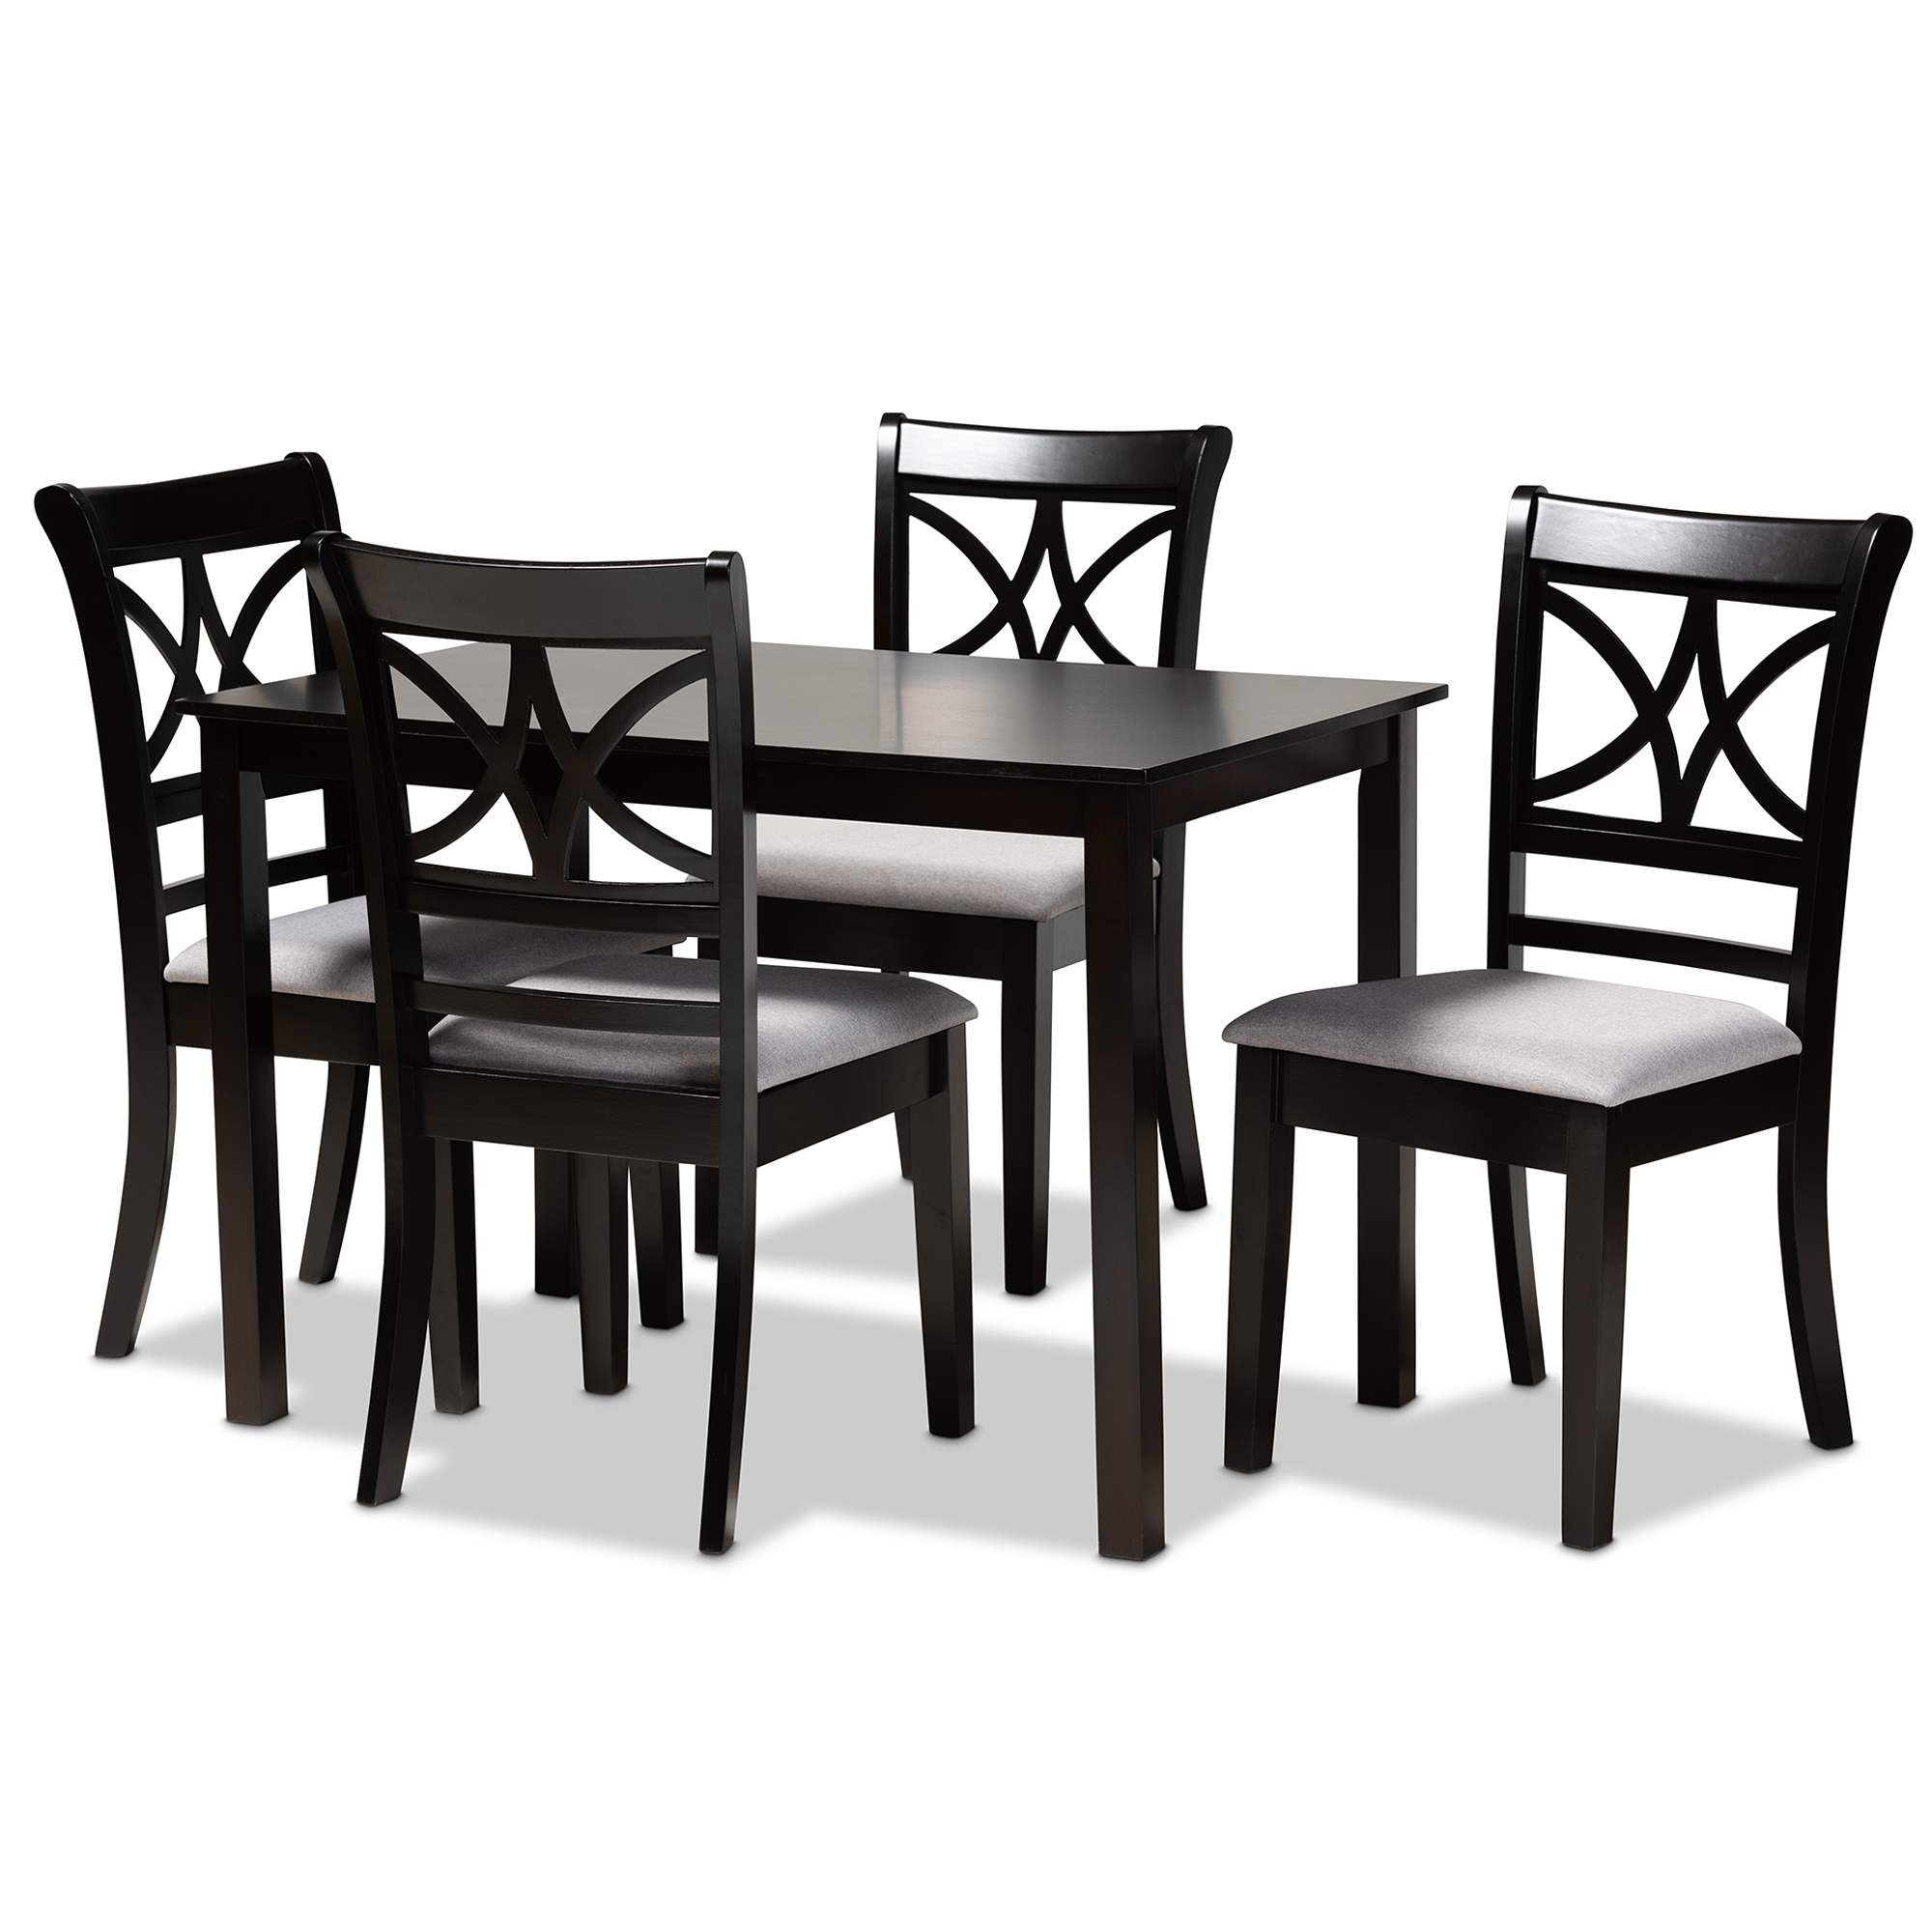 Gray Dining Sets & Collections With Free Shipping - Sears